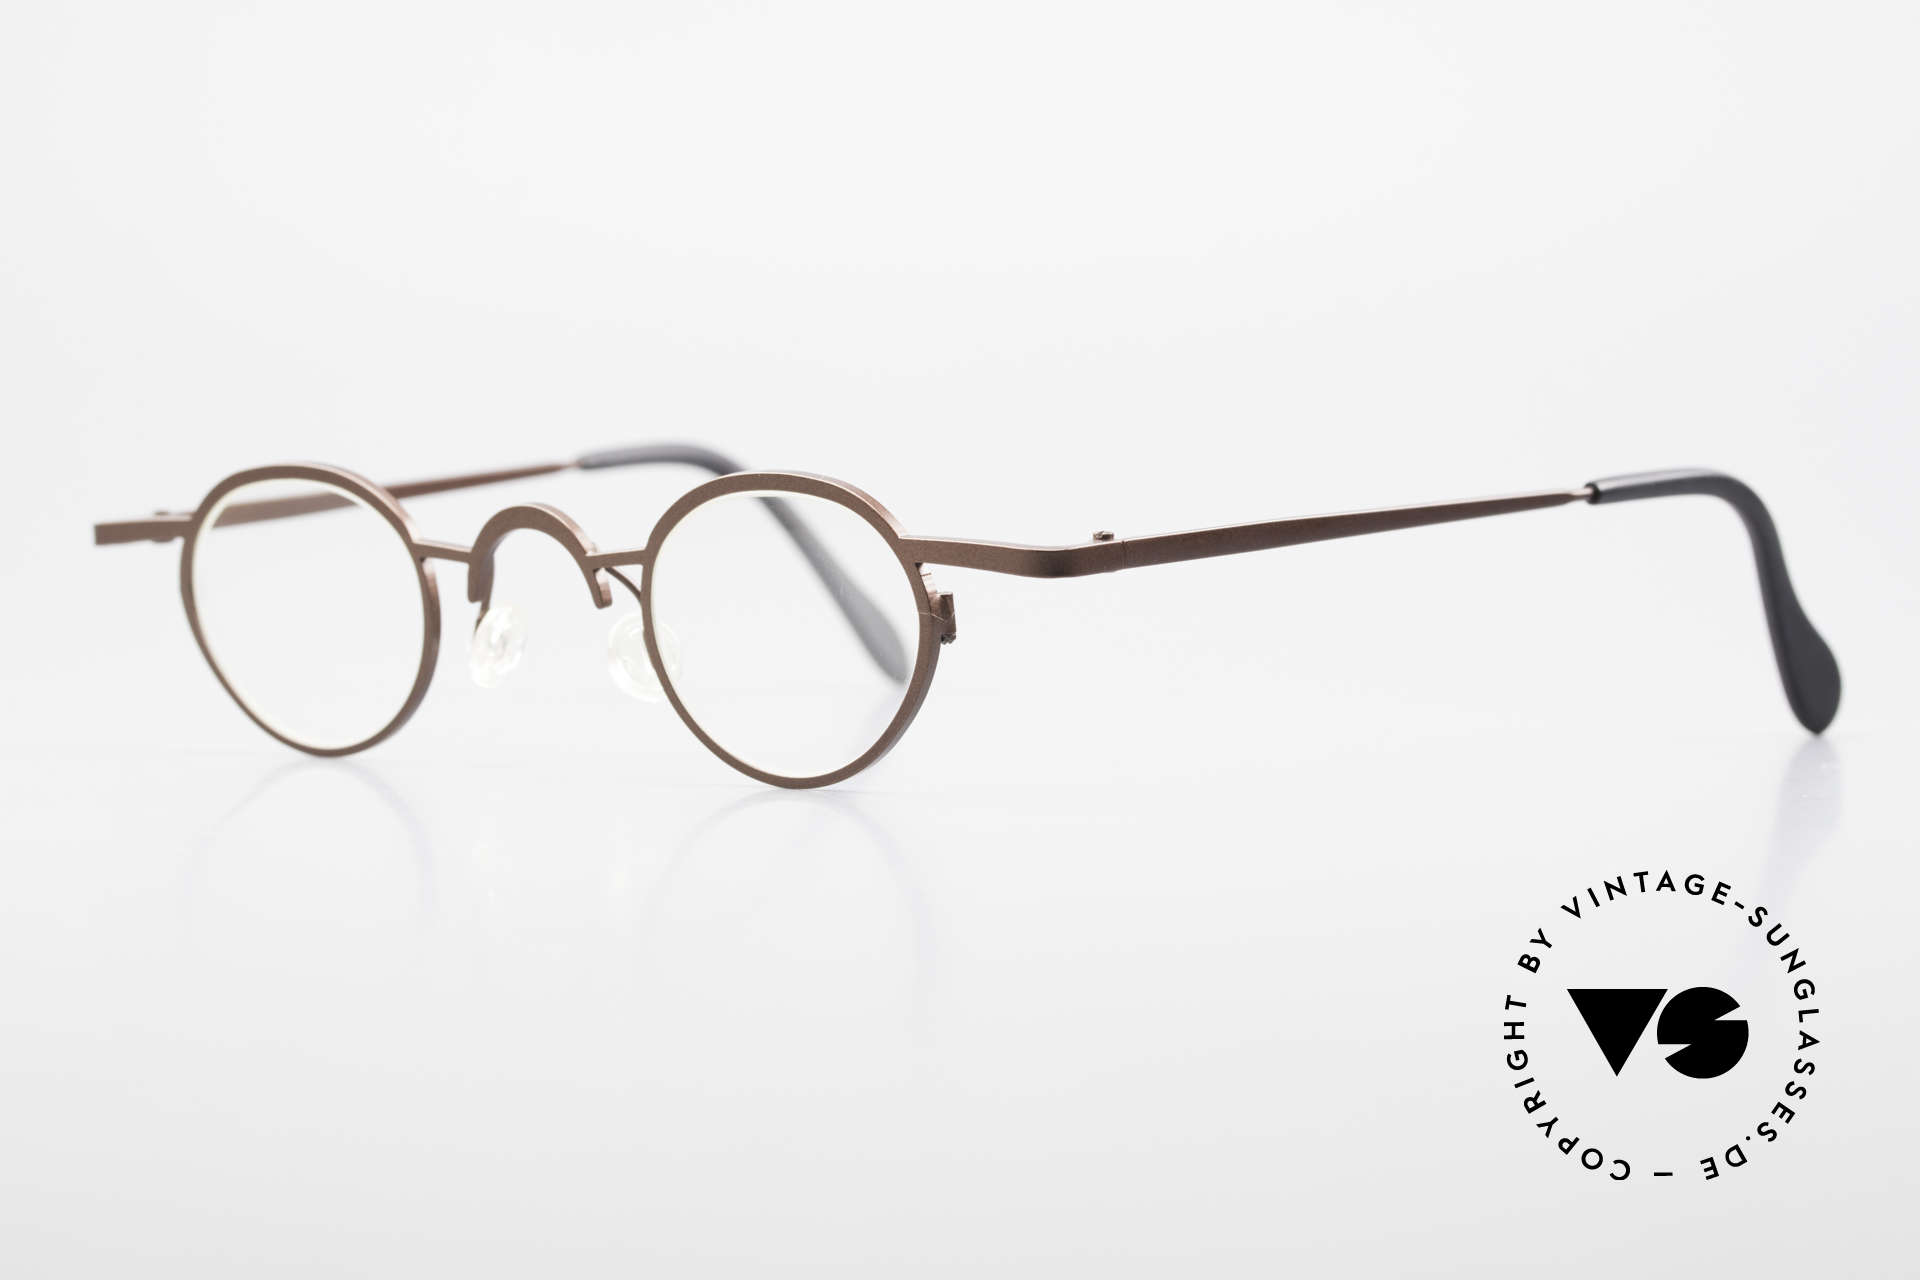 Theo Belgium Pat Avant-Garde Vintage Specs 90s, made for the avant-garde, individualists & trend-setters, Made for Men and Women